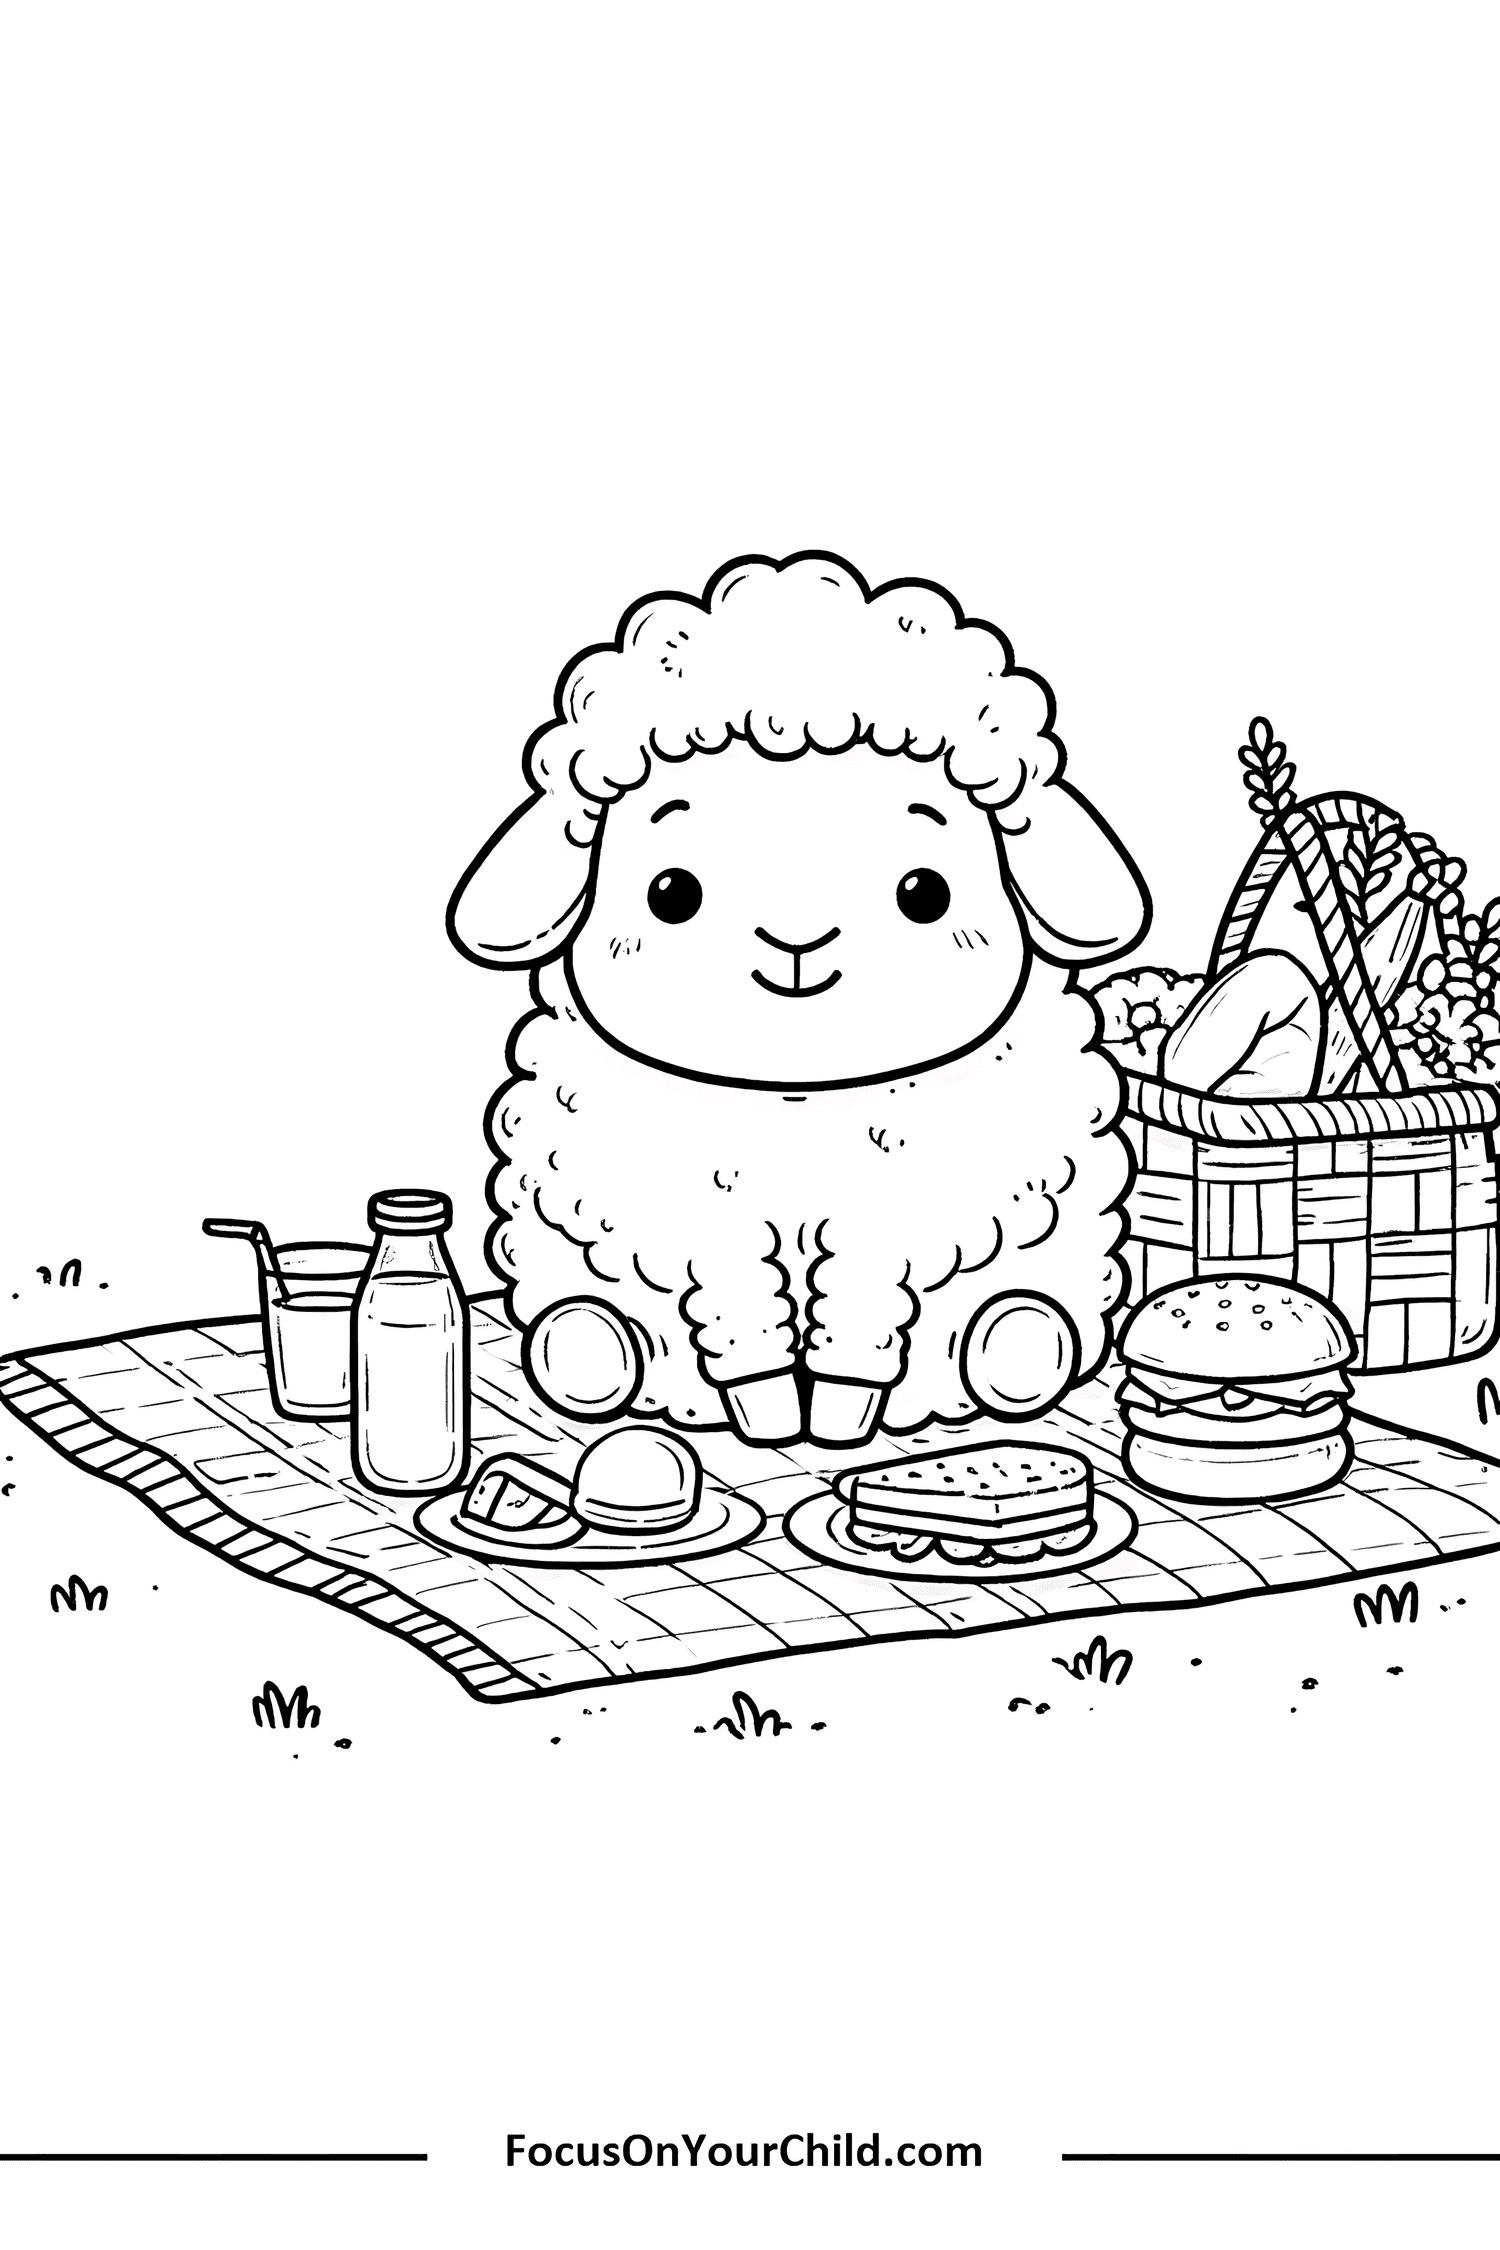 Fluffy sheep enjoying a picnic with sandwich, cake, burger, and basket on checkered blanket.